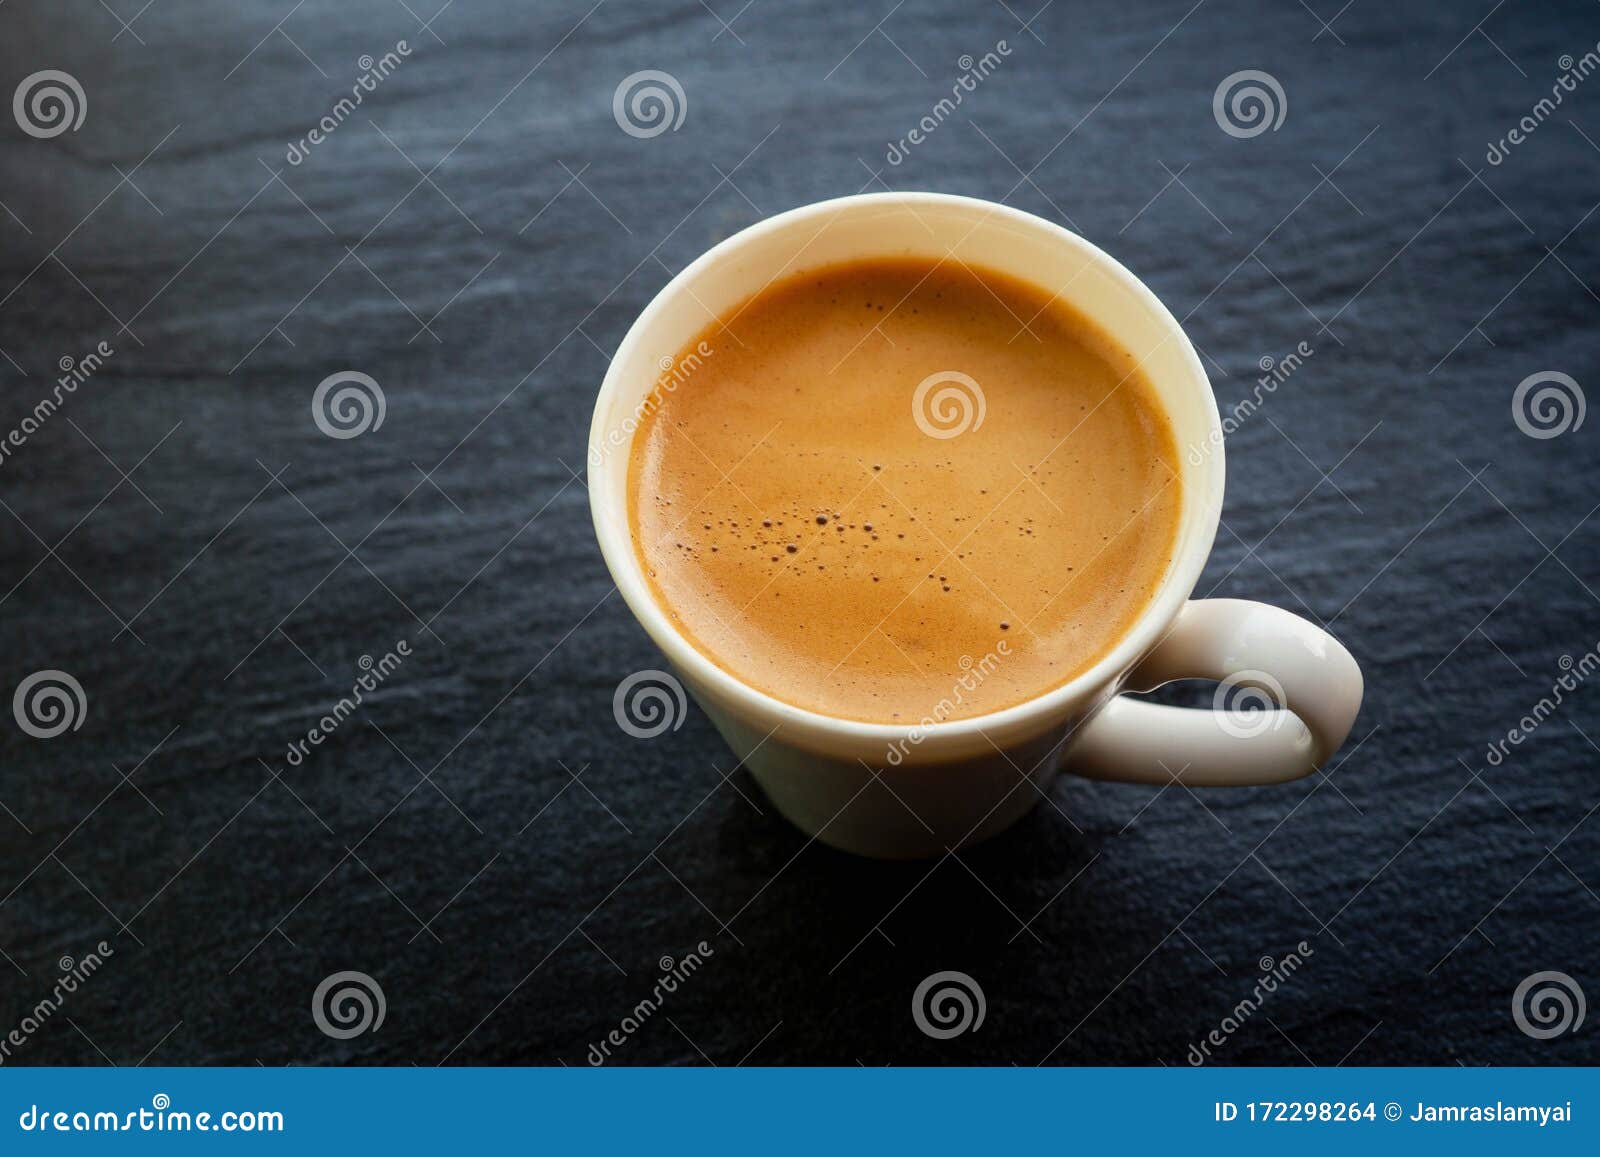 hot coffee cup with foam crema on a stone board back color with copy space